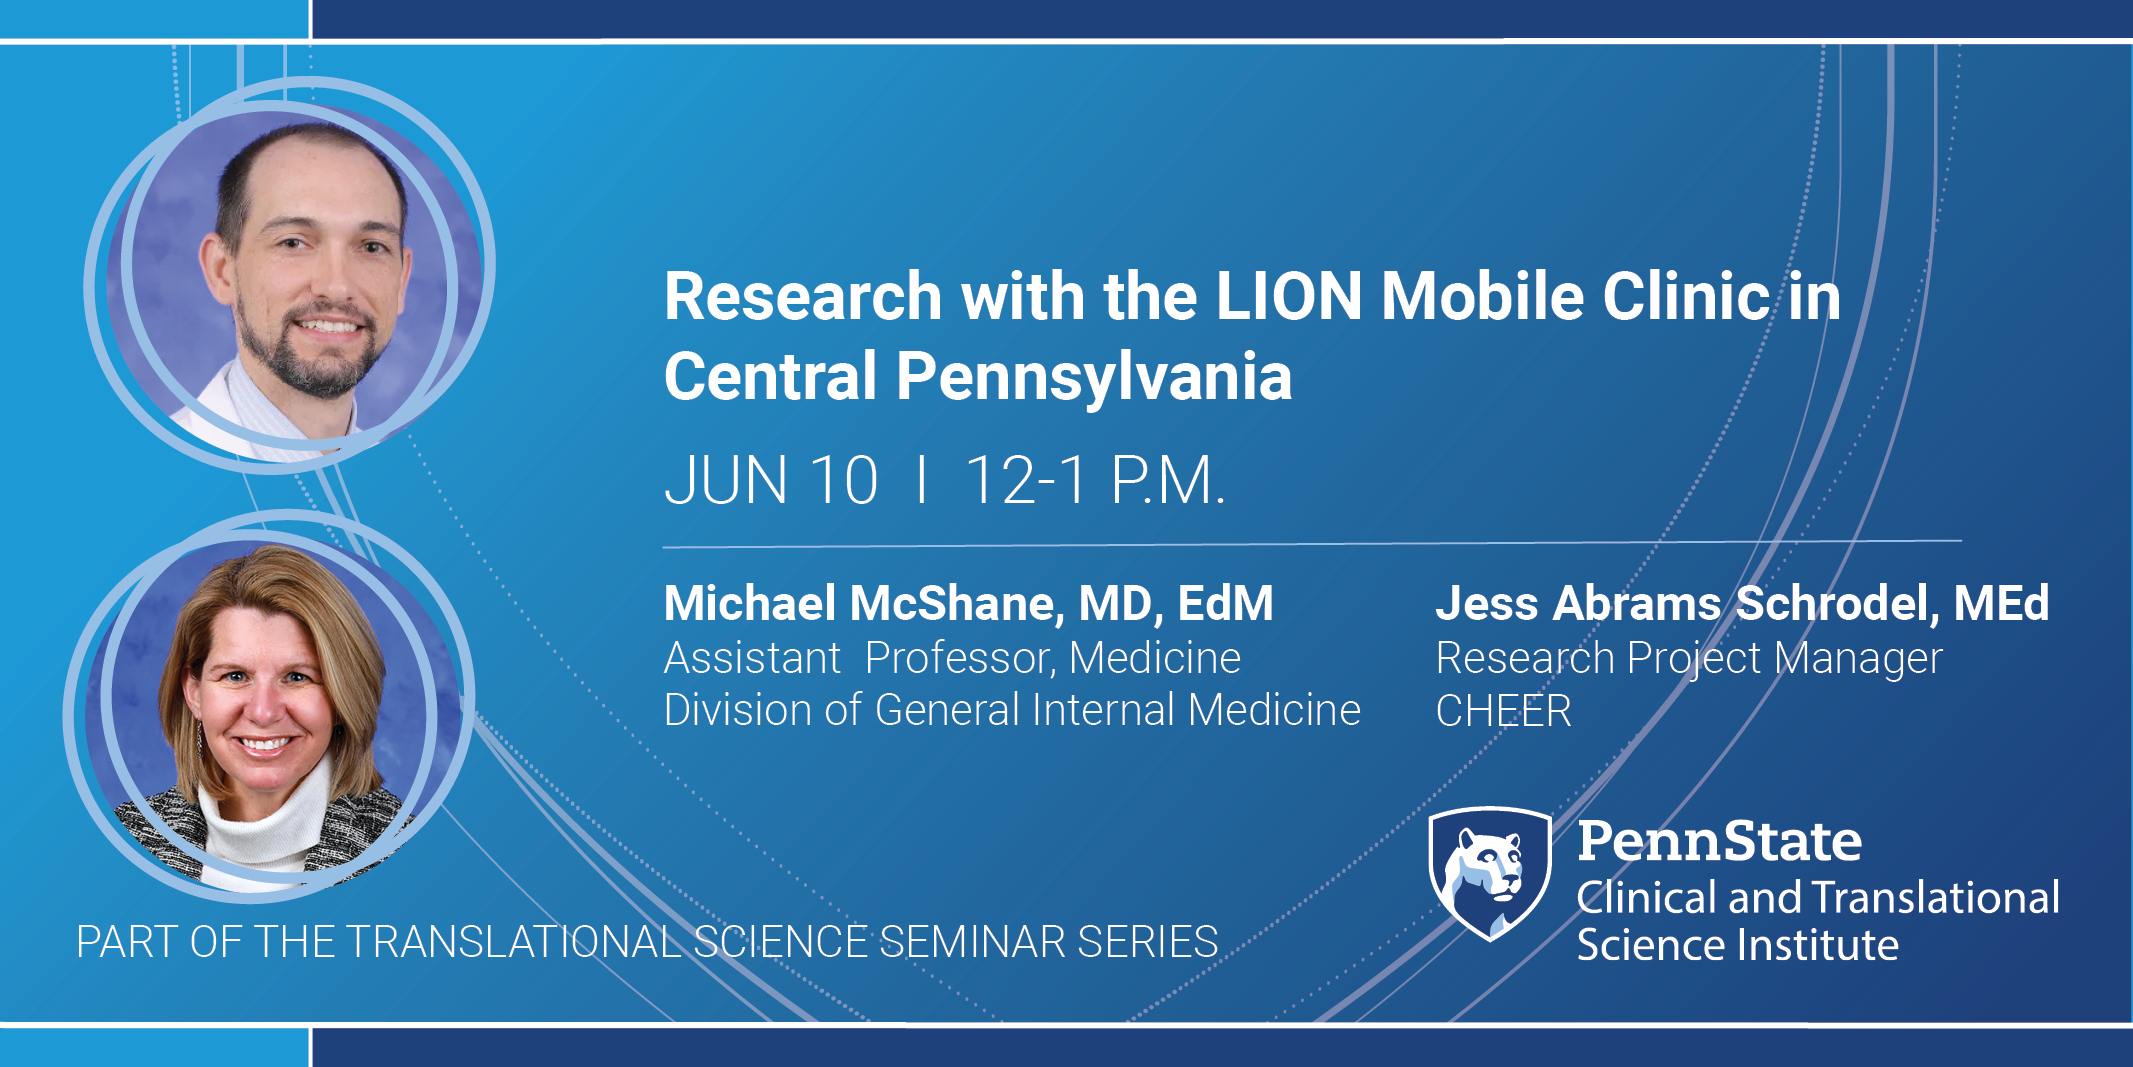 CTSI Translational Science Seminar Series: Research with the LION Mobile Clinic in Central Pennsylvania